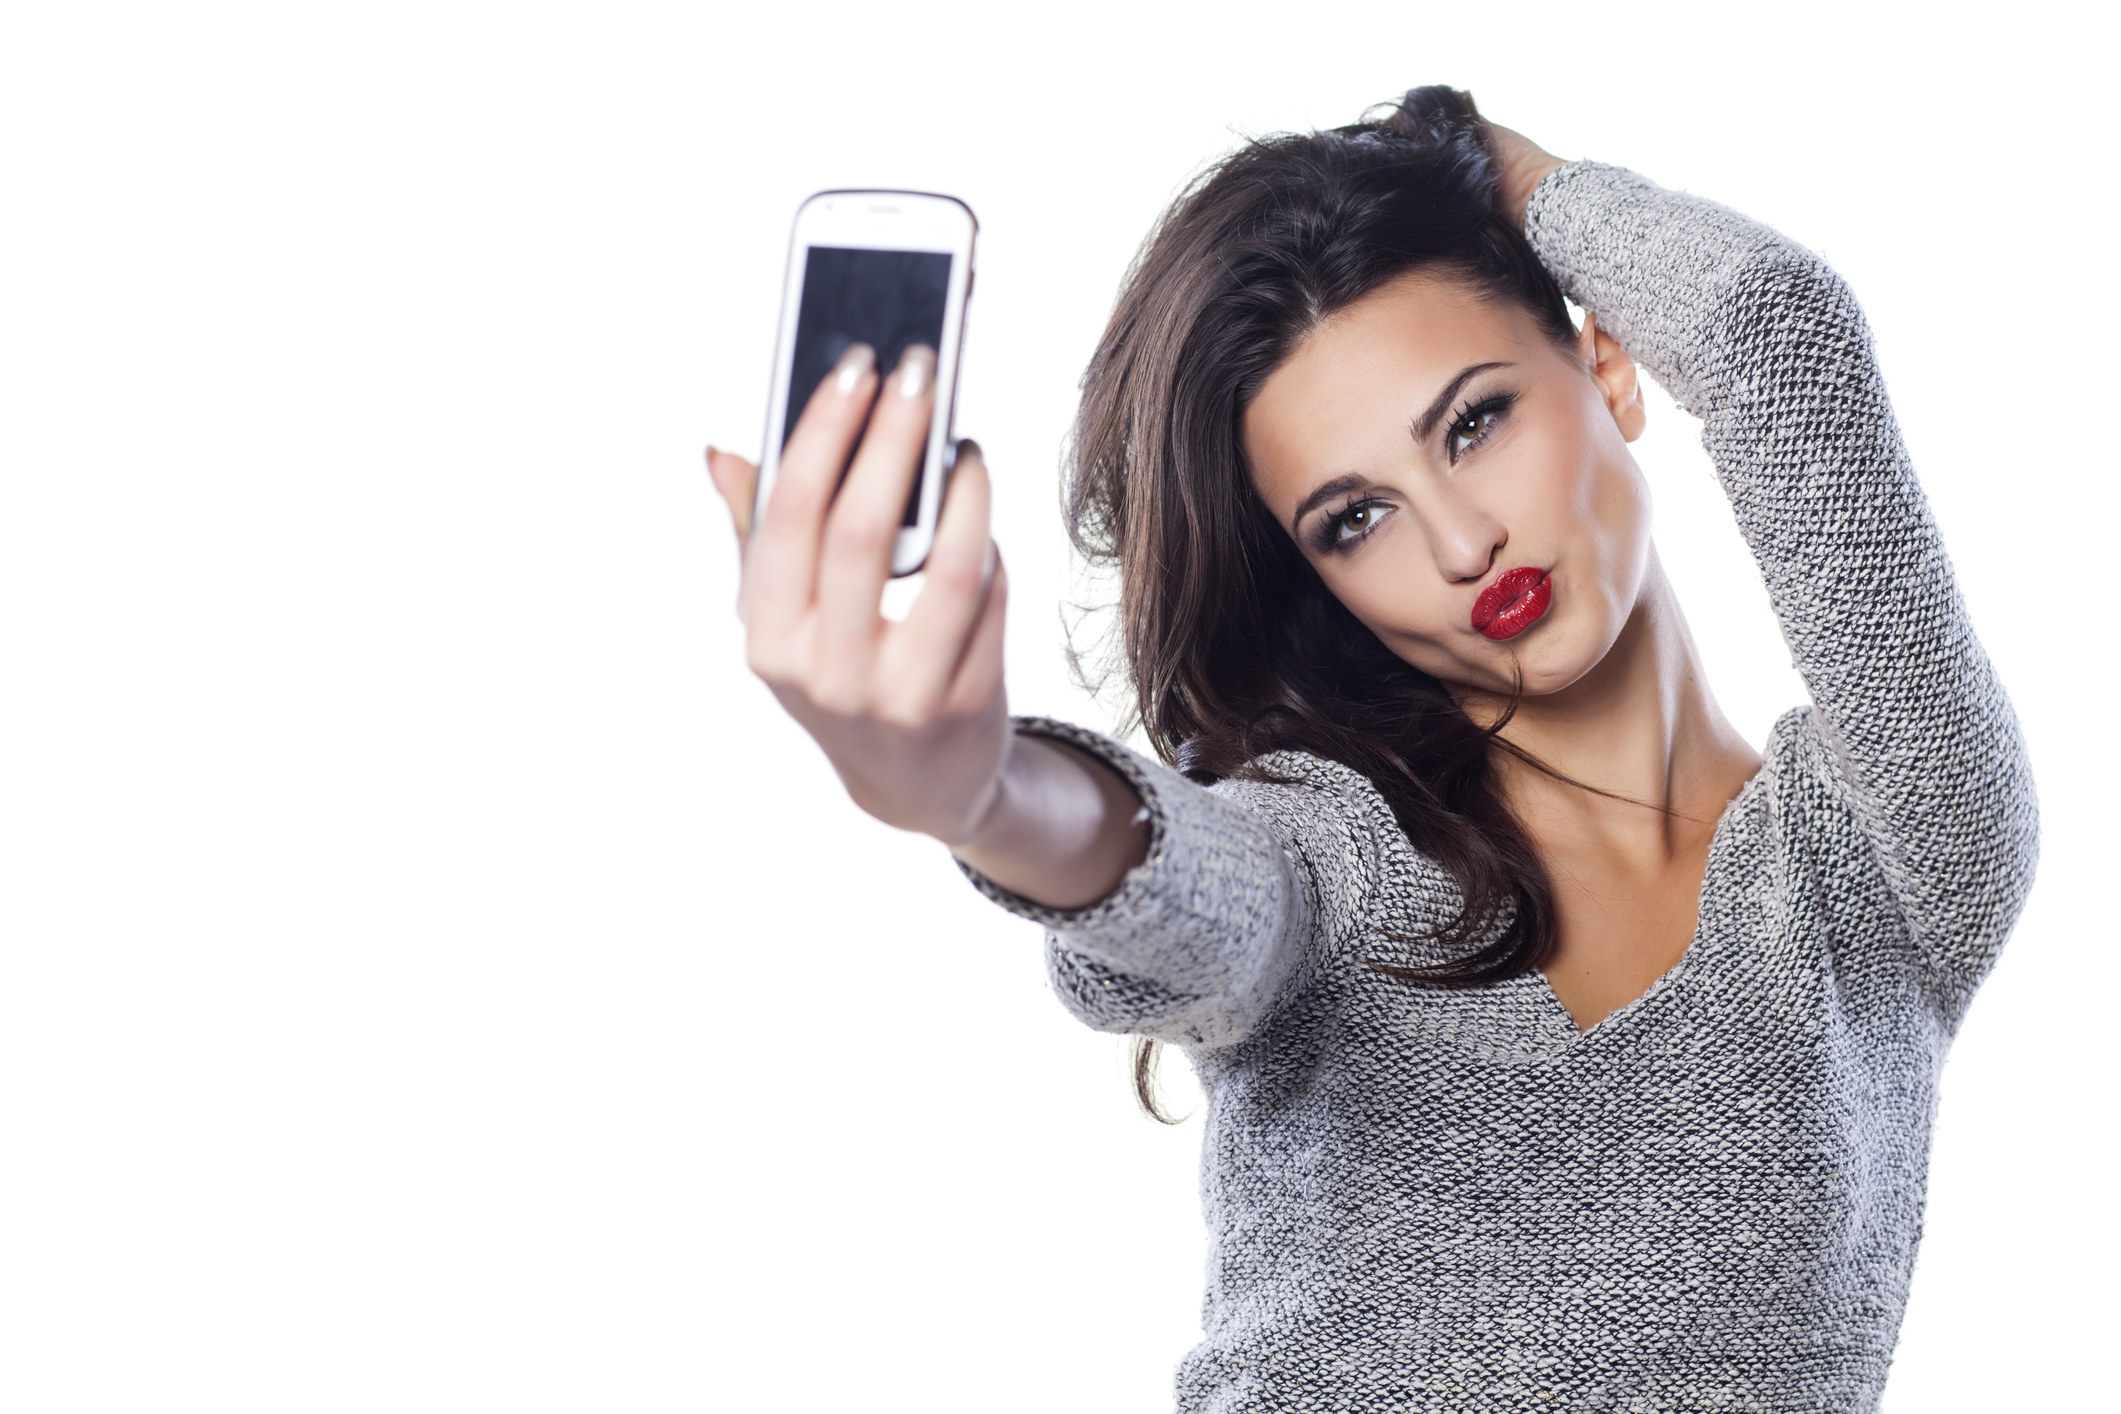 A woman taking a selfie and pursing her lips